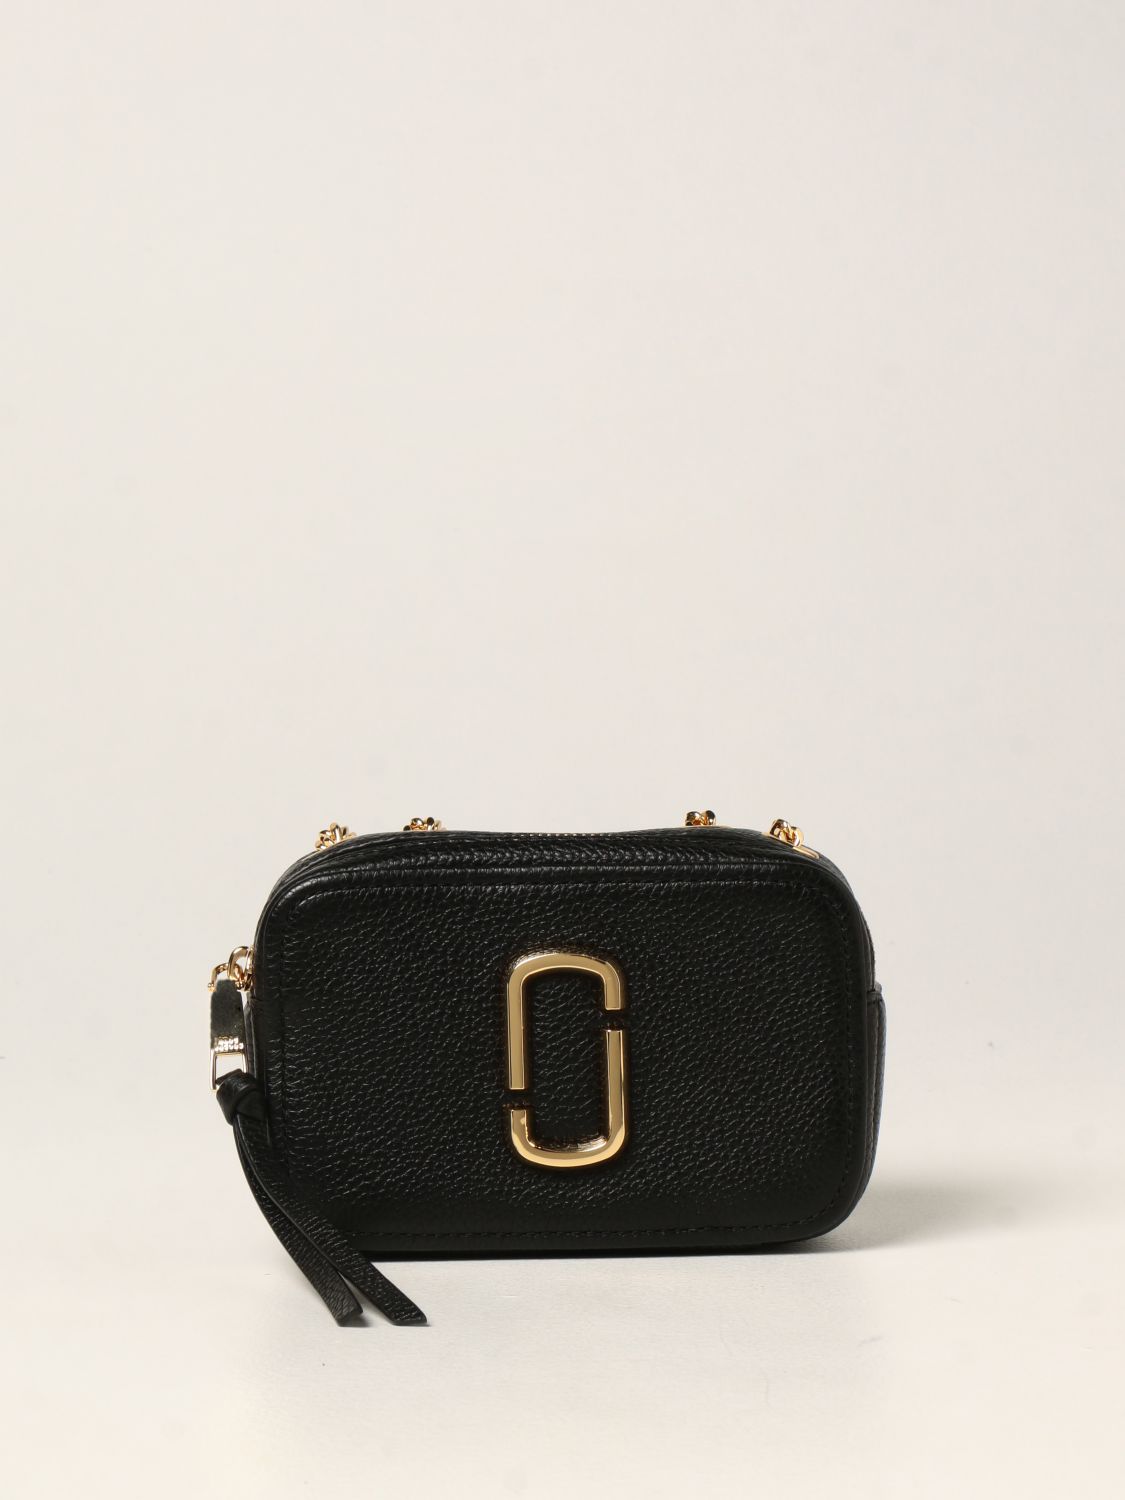 MARC JACOBS: The Glam Shot 17 leather bag - Black | Marc Jacobs ...